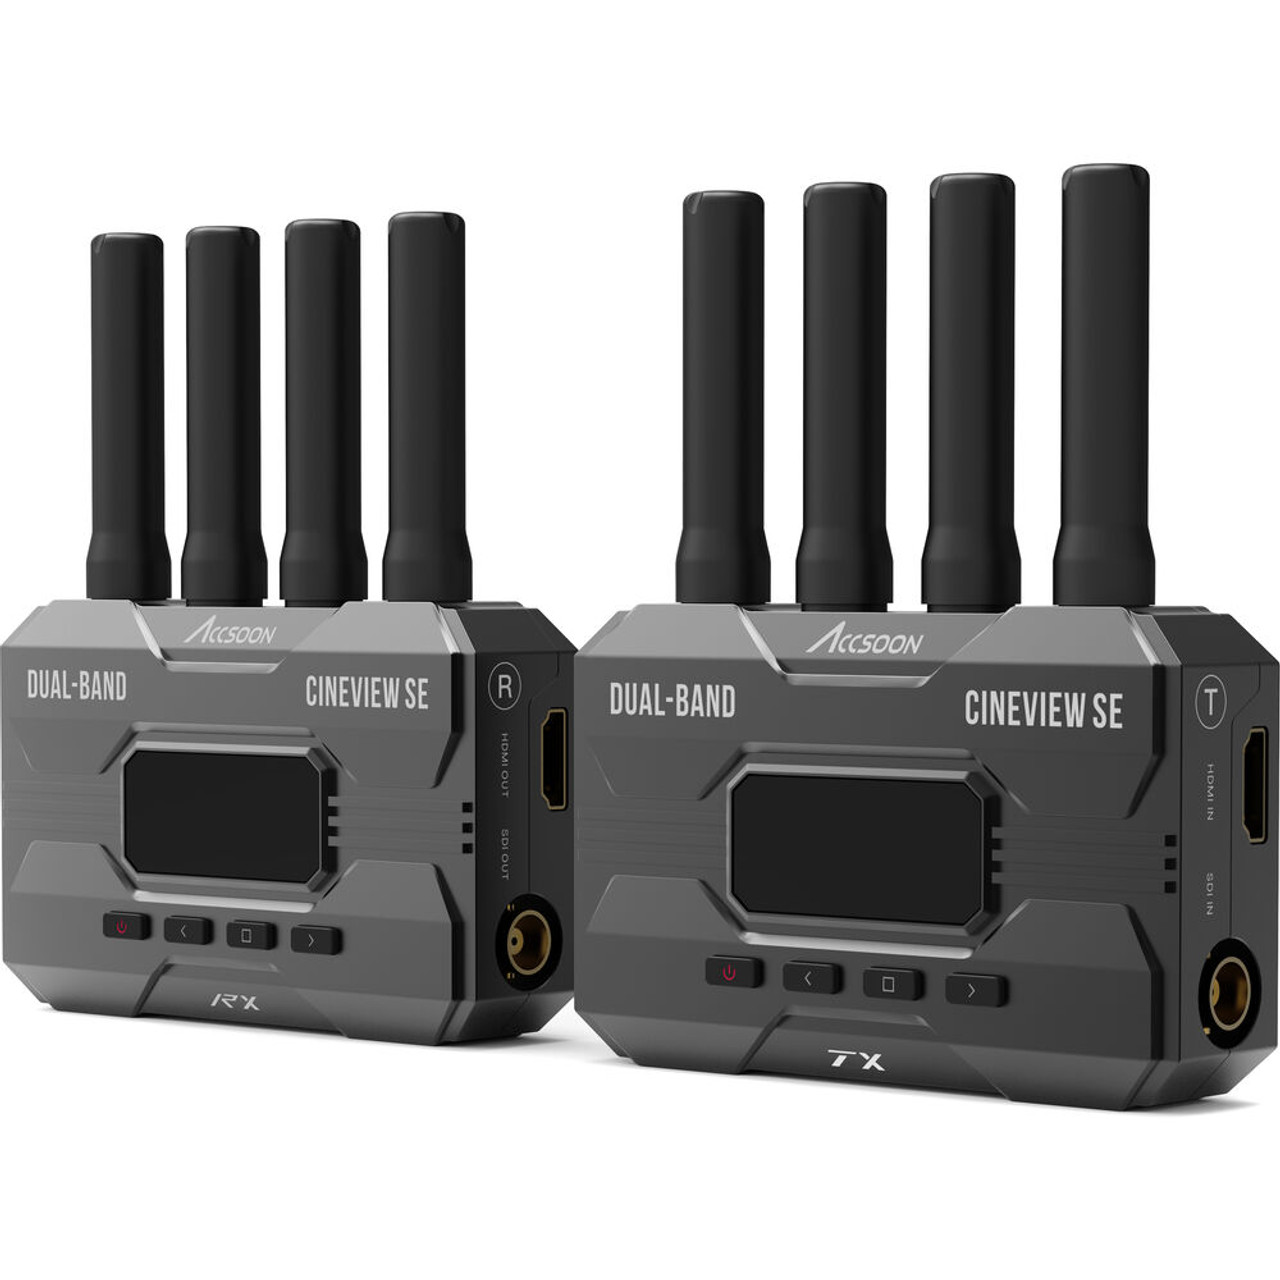 Accsoon CineView SE Wireless Video Transmitter & Receiver Kit 無線圖傳